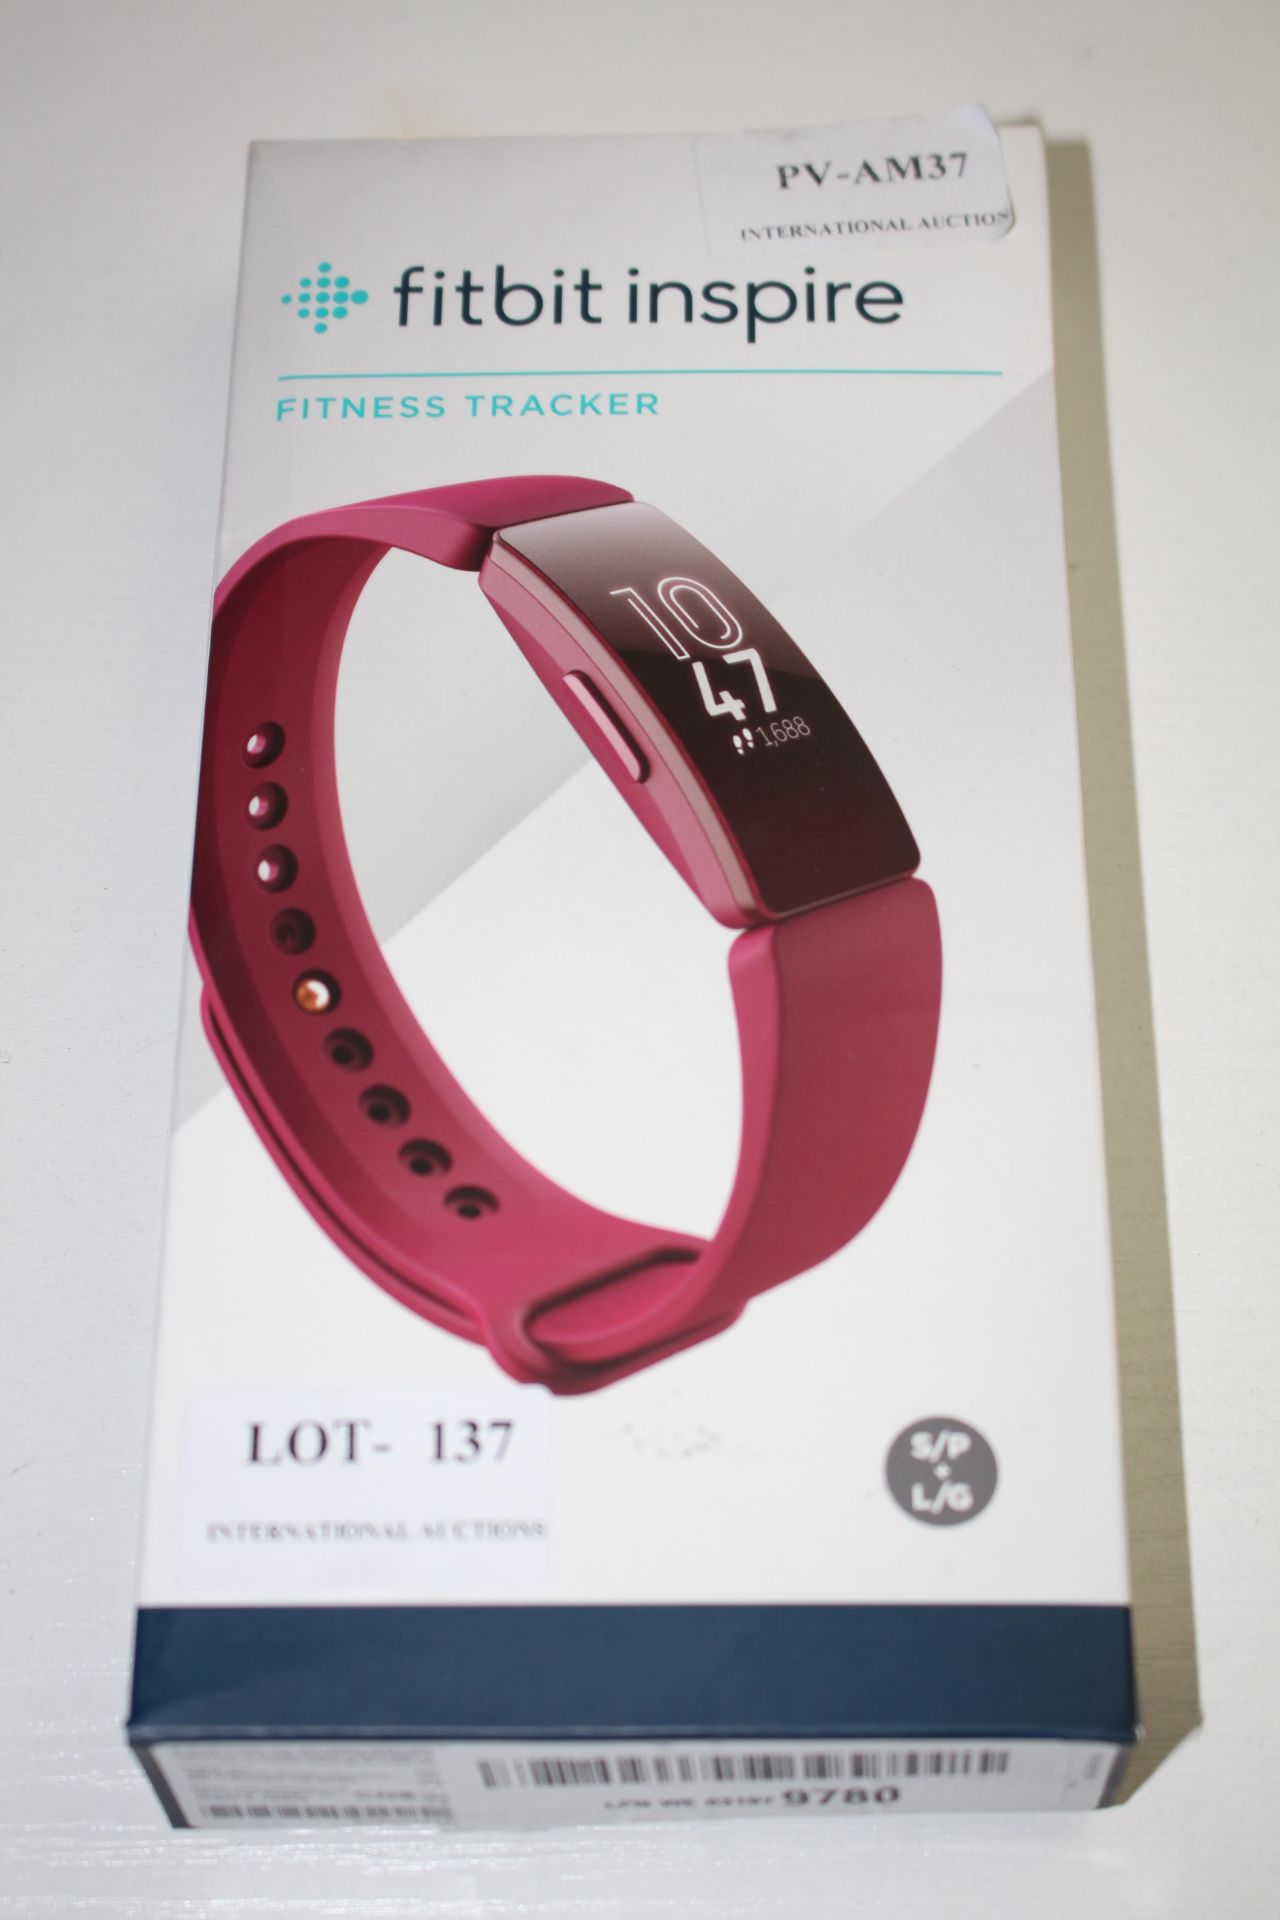 BOXED FITBIT INSPIRE FITNESS TRACKER RRP £74.95Condition ReportAppraisal Available on Request- All